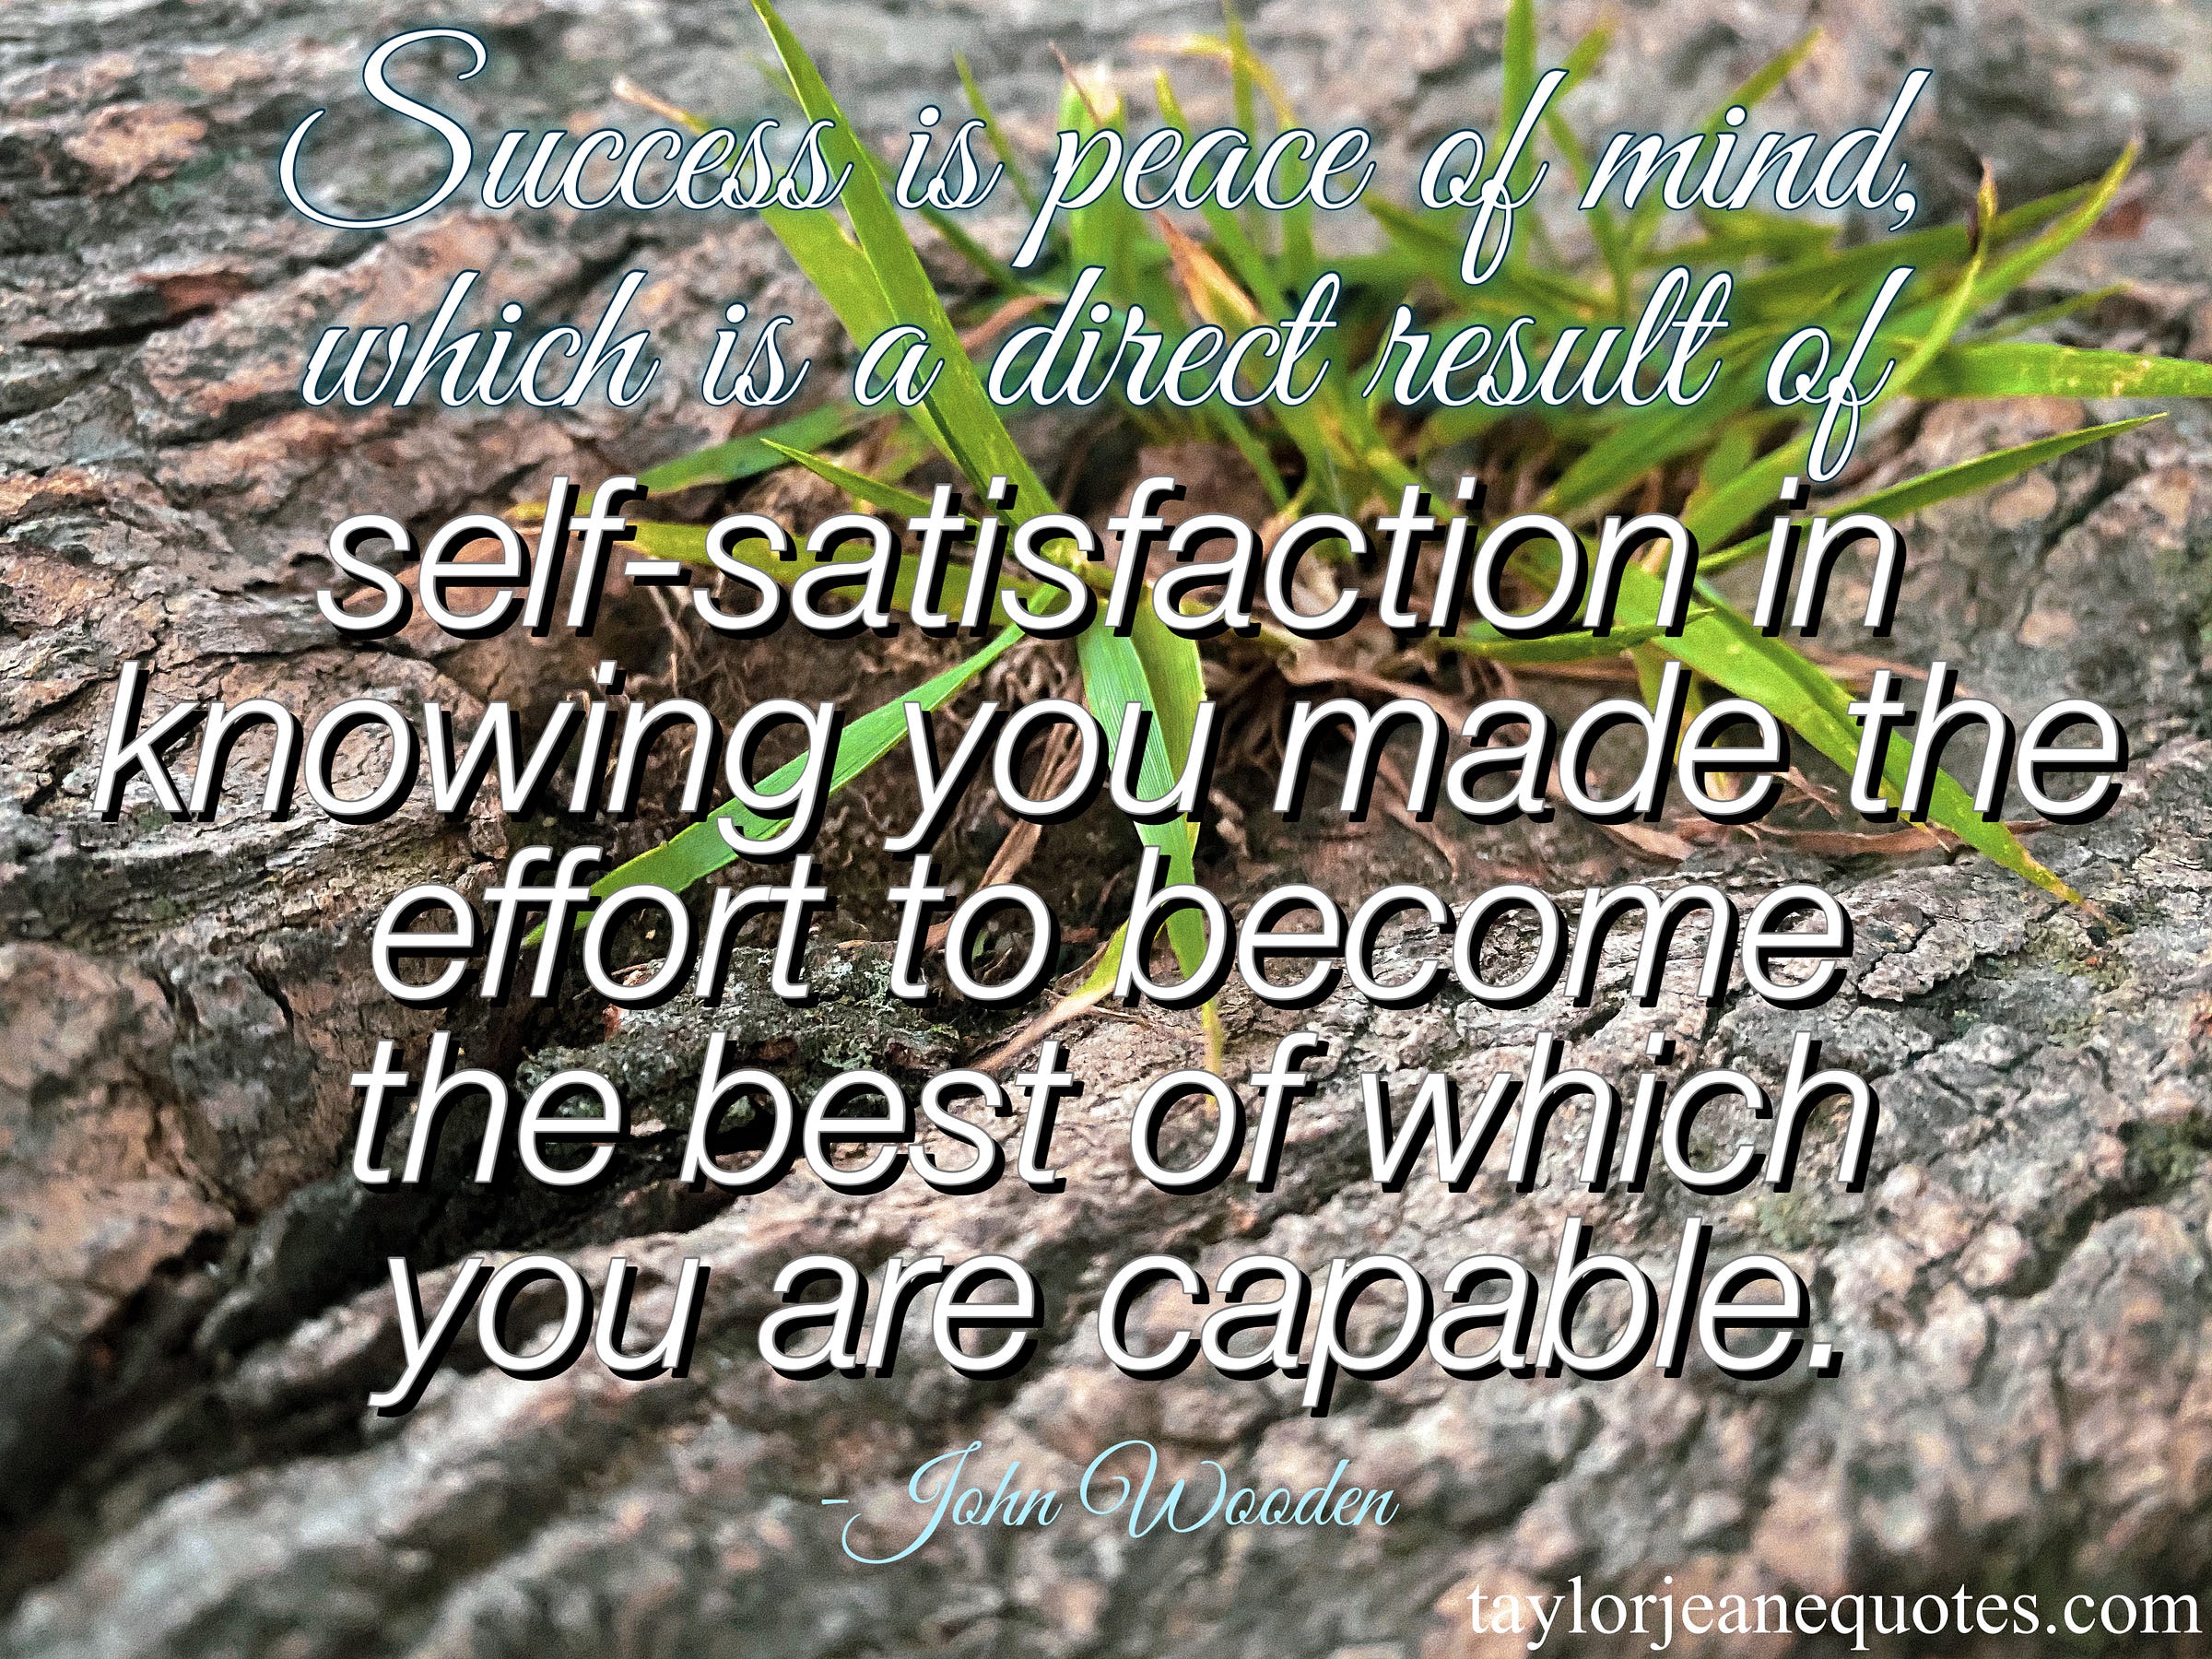 taylor jeane quotes, taylor jeane, taylor wilson, free motivational quote of the day, inspirational daily quotes, john wooden, john wooden quotes, success quotes, motivational quotes, definition of success, what is success, how to succeed, how to succeed in life, effort quotes, satisfaction quotes, goal quotes, goal setting quotes, peace of mind quotes, life quotes, do your best quotes, never give up quotes, new years resolution quotes, new years quotes